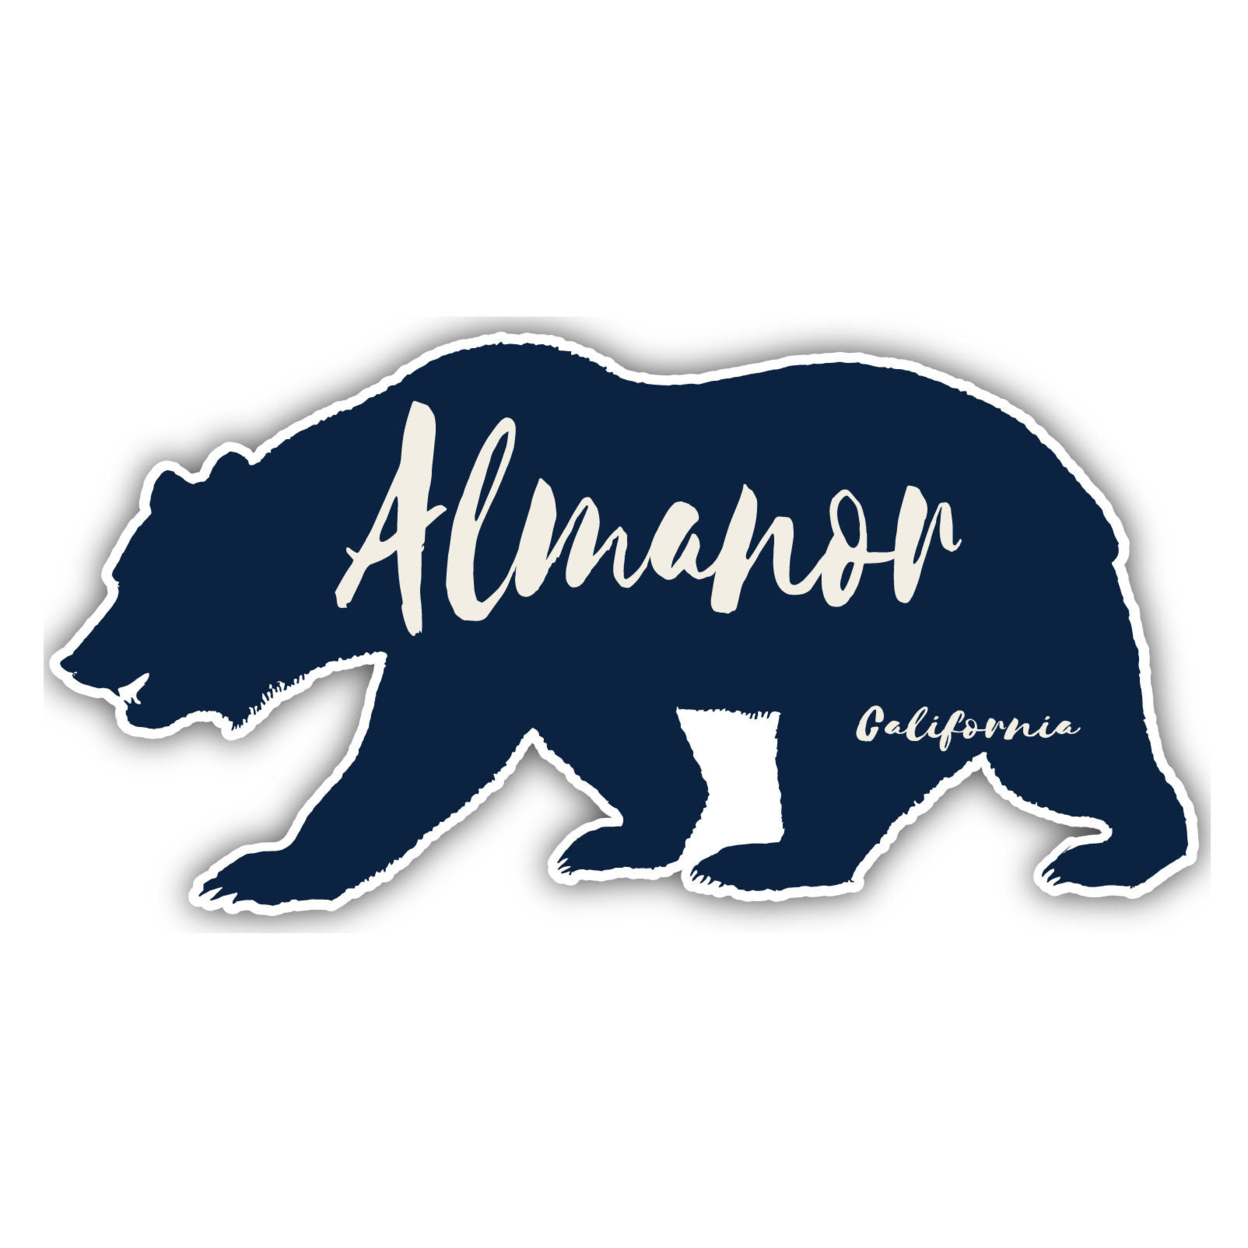 Almanor California Souvenir Decorative Stickers (Choose Theme And Size) - 4-Pack, 10-Inch, Tent